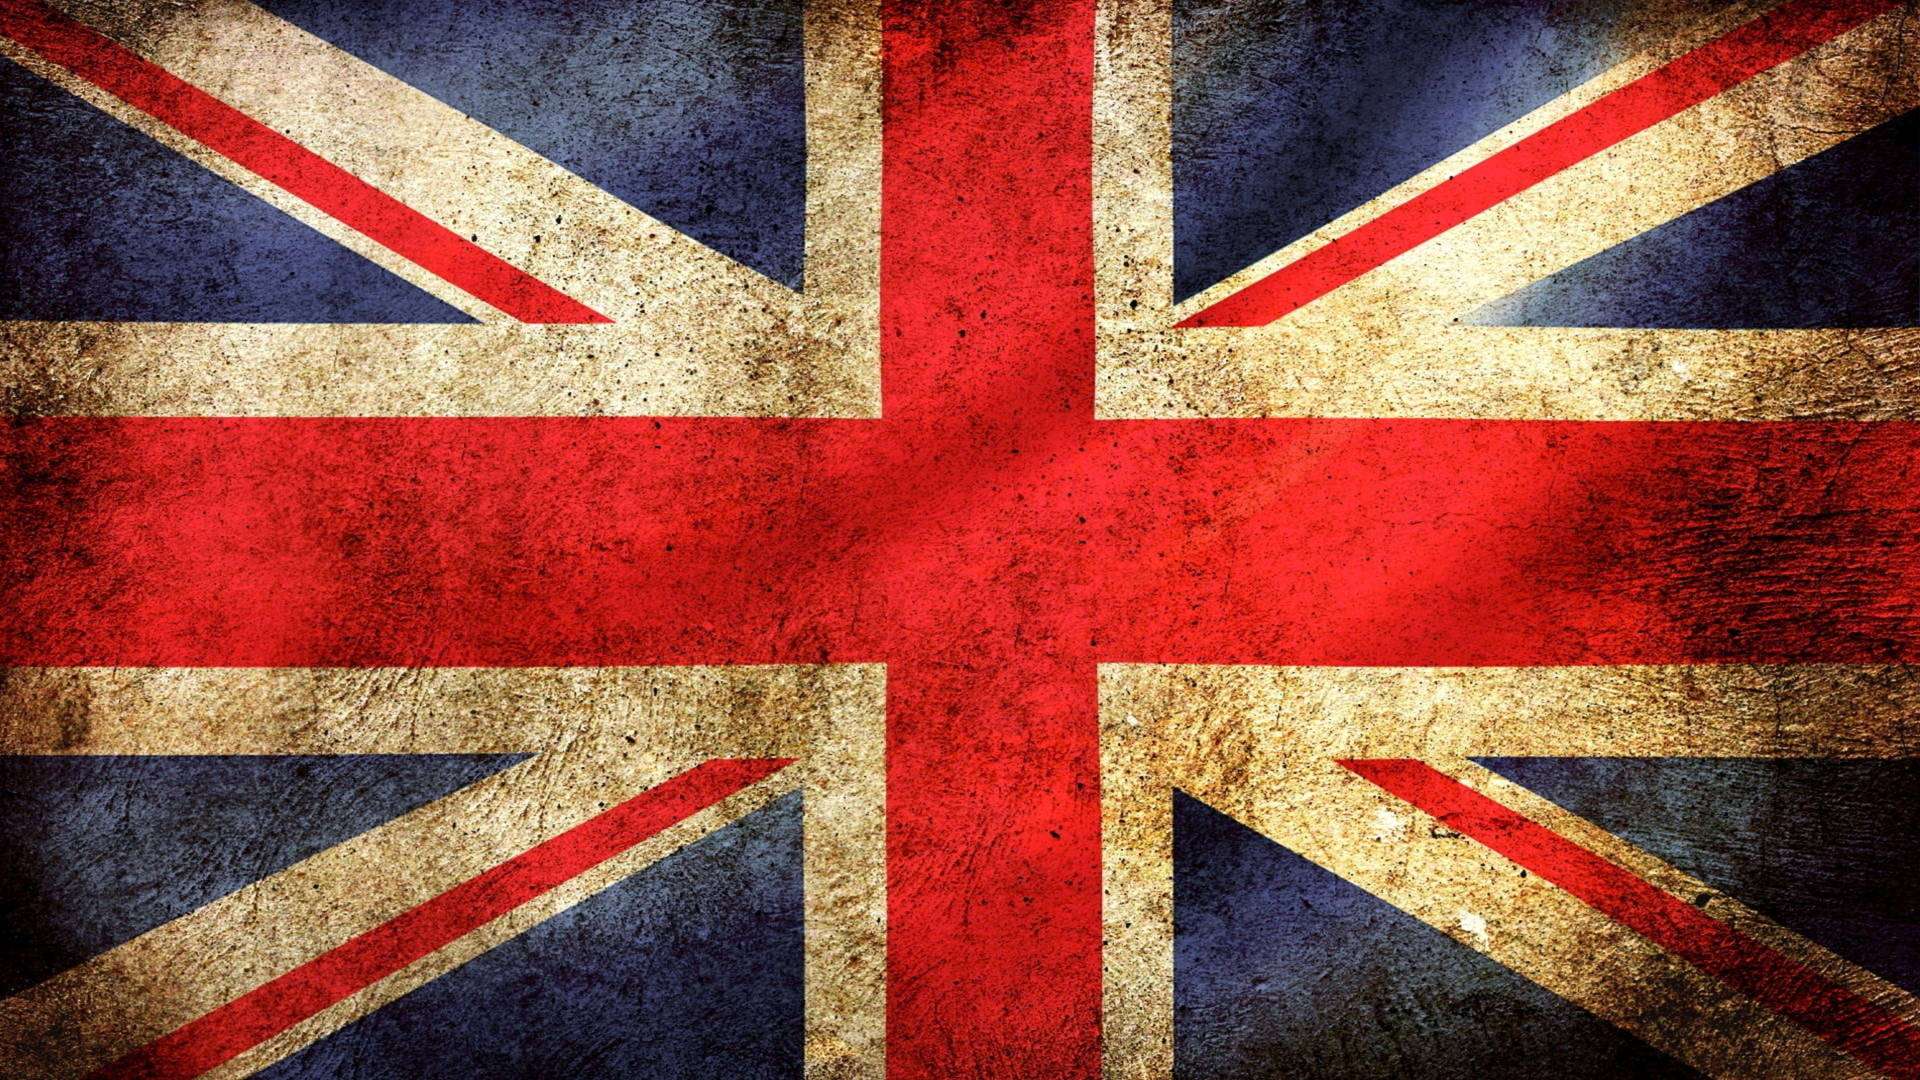 Free England Wallpaper Downloads, [400+] England Wallpapers for FREE |  